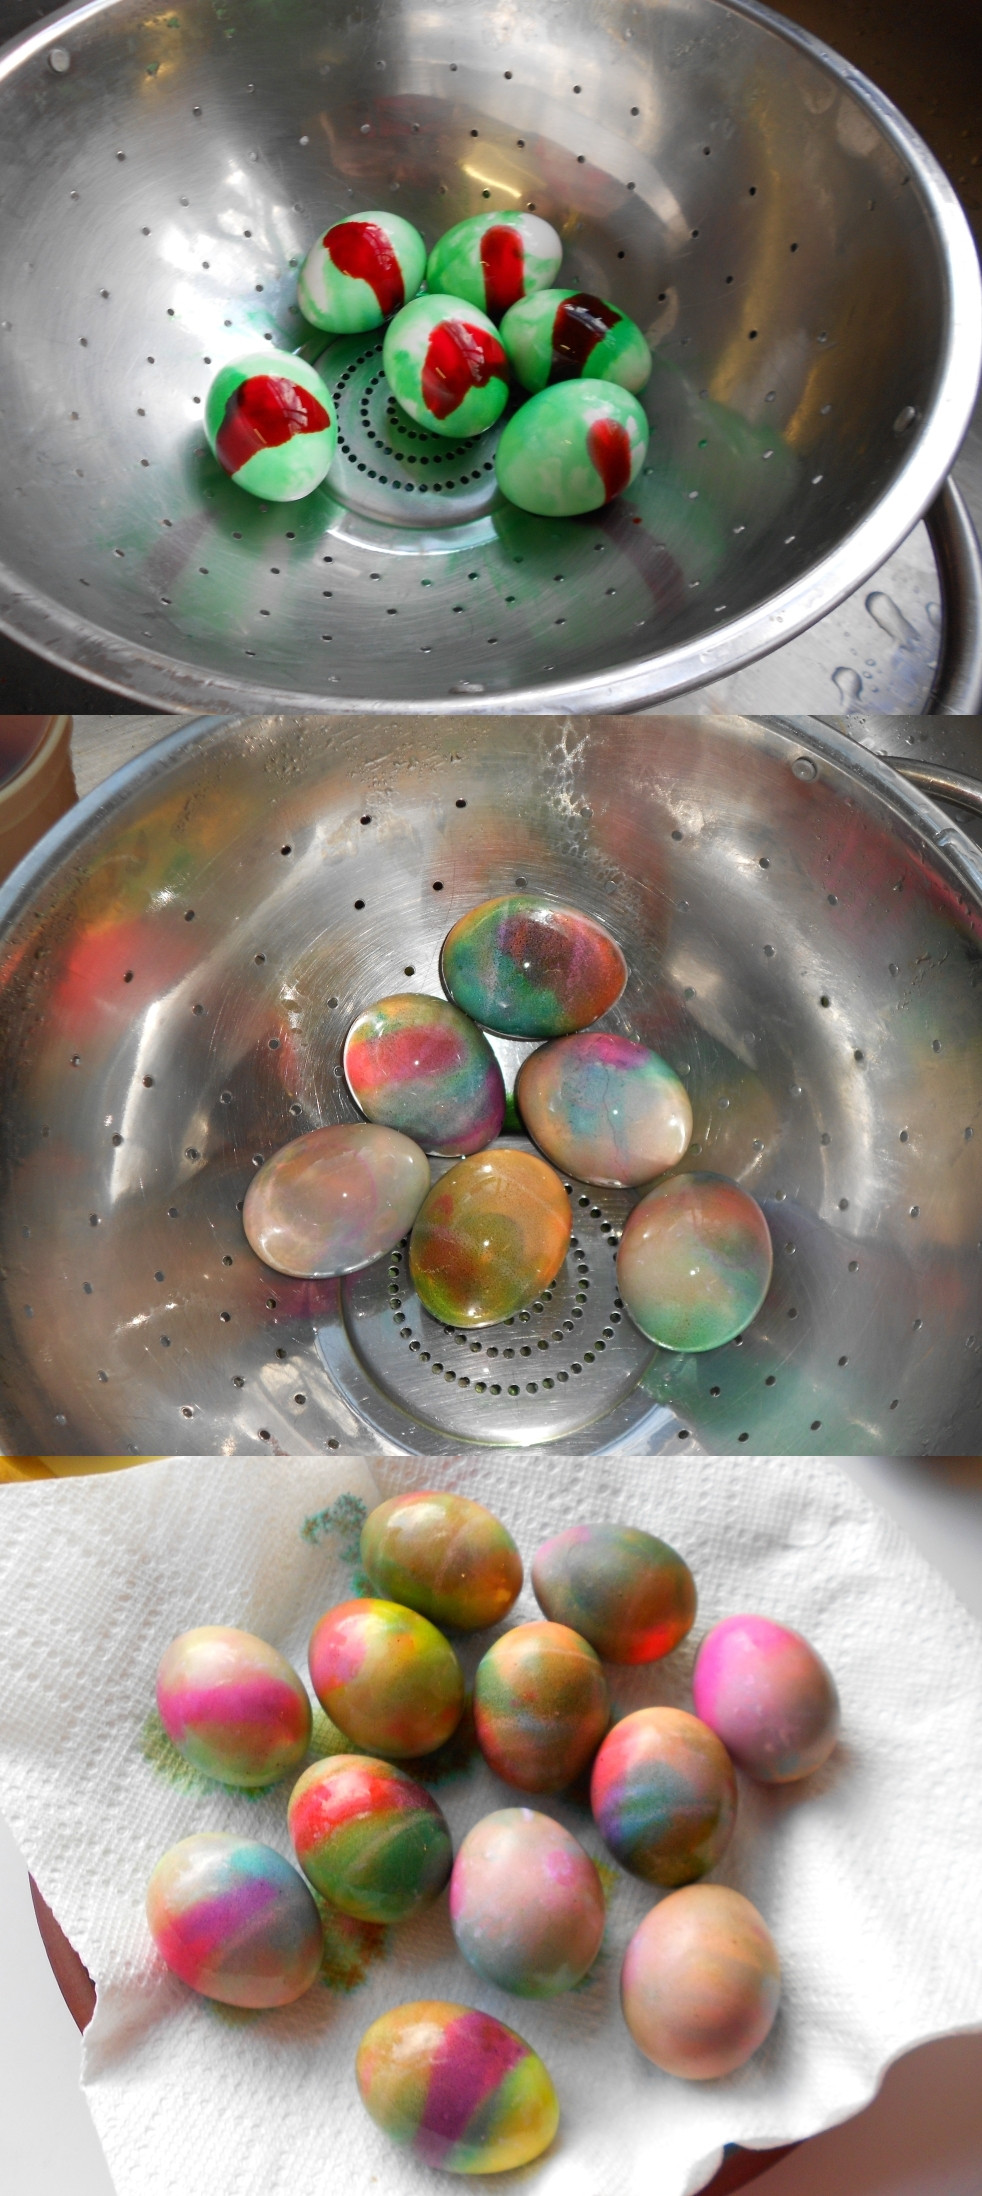 How To Make Easter Egg Dye With Food Coloring
 How To Make Tie Dye Easter Eggs Bell Web DevelopmentBell